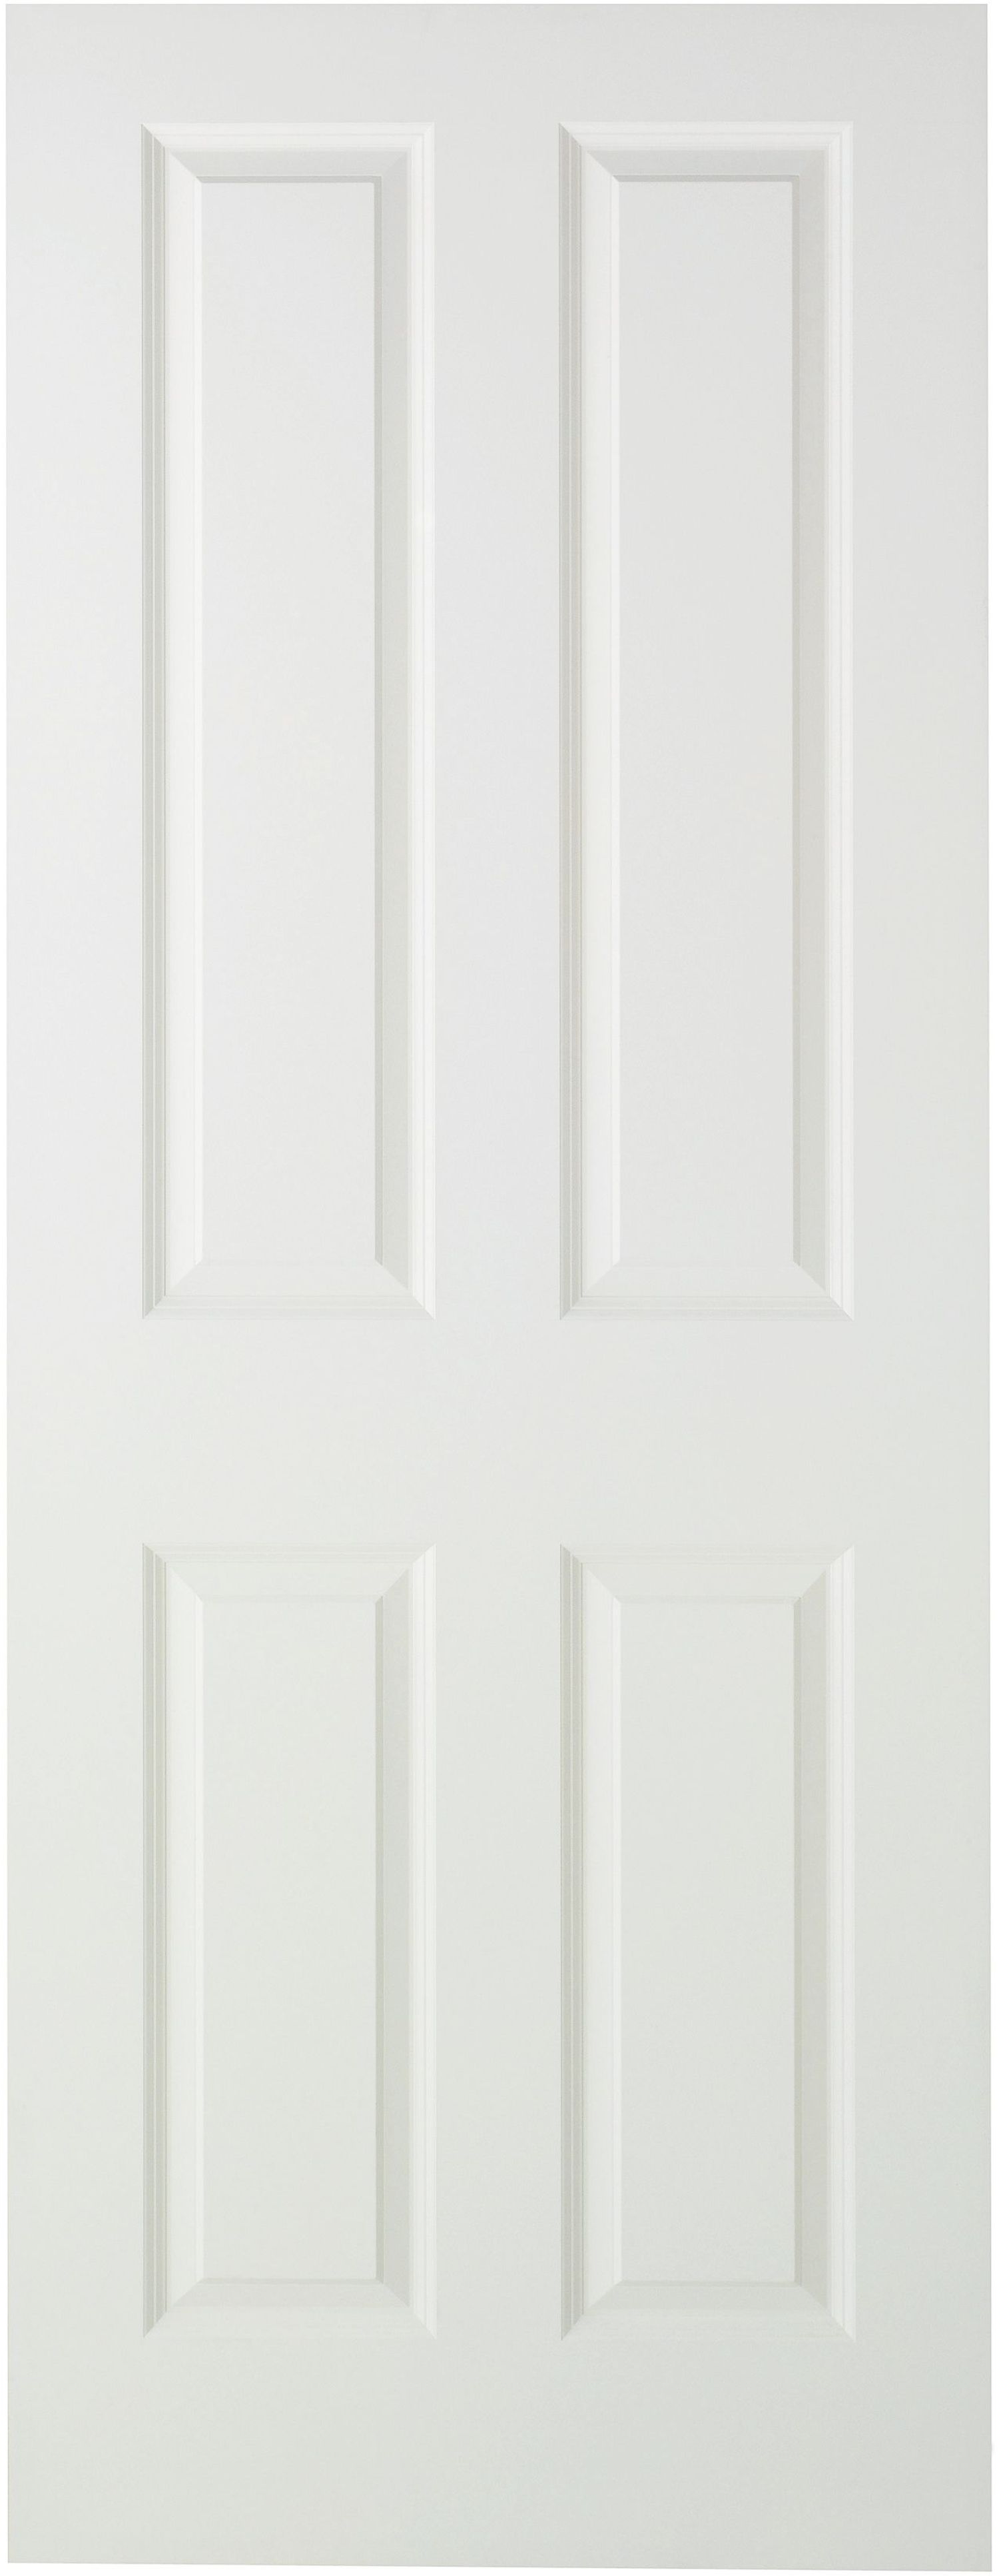 Wickes Chester White Smooth Moulded 4 Panel Internal Door